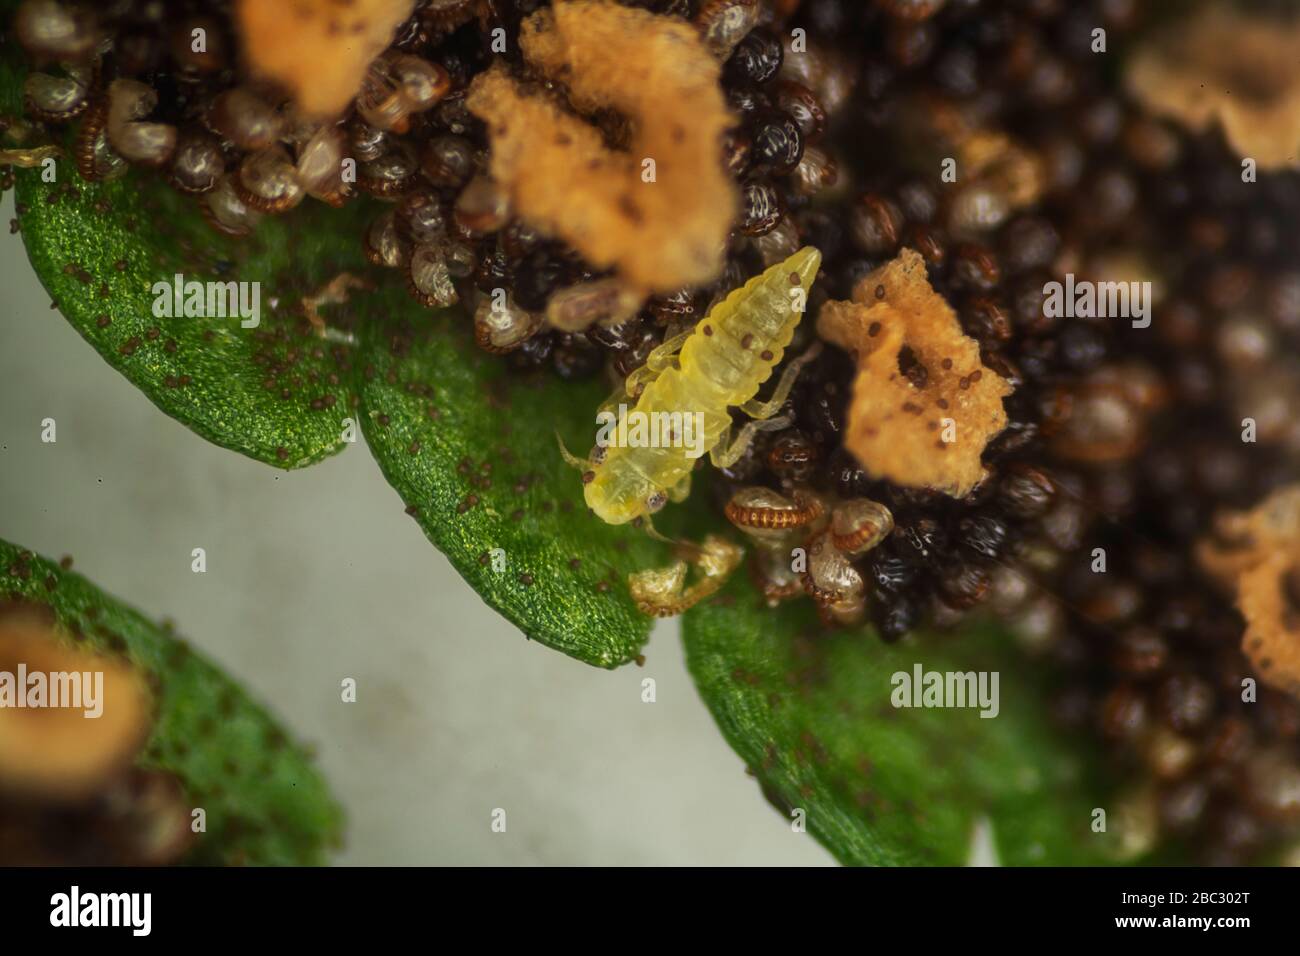 Aphid, greenfly on underside of fern leaf Stock Photo